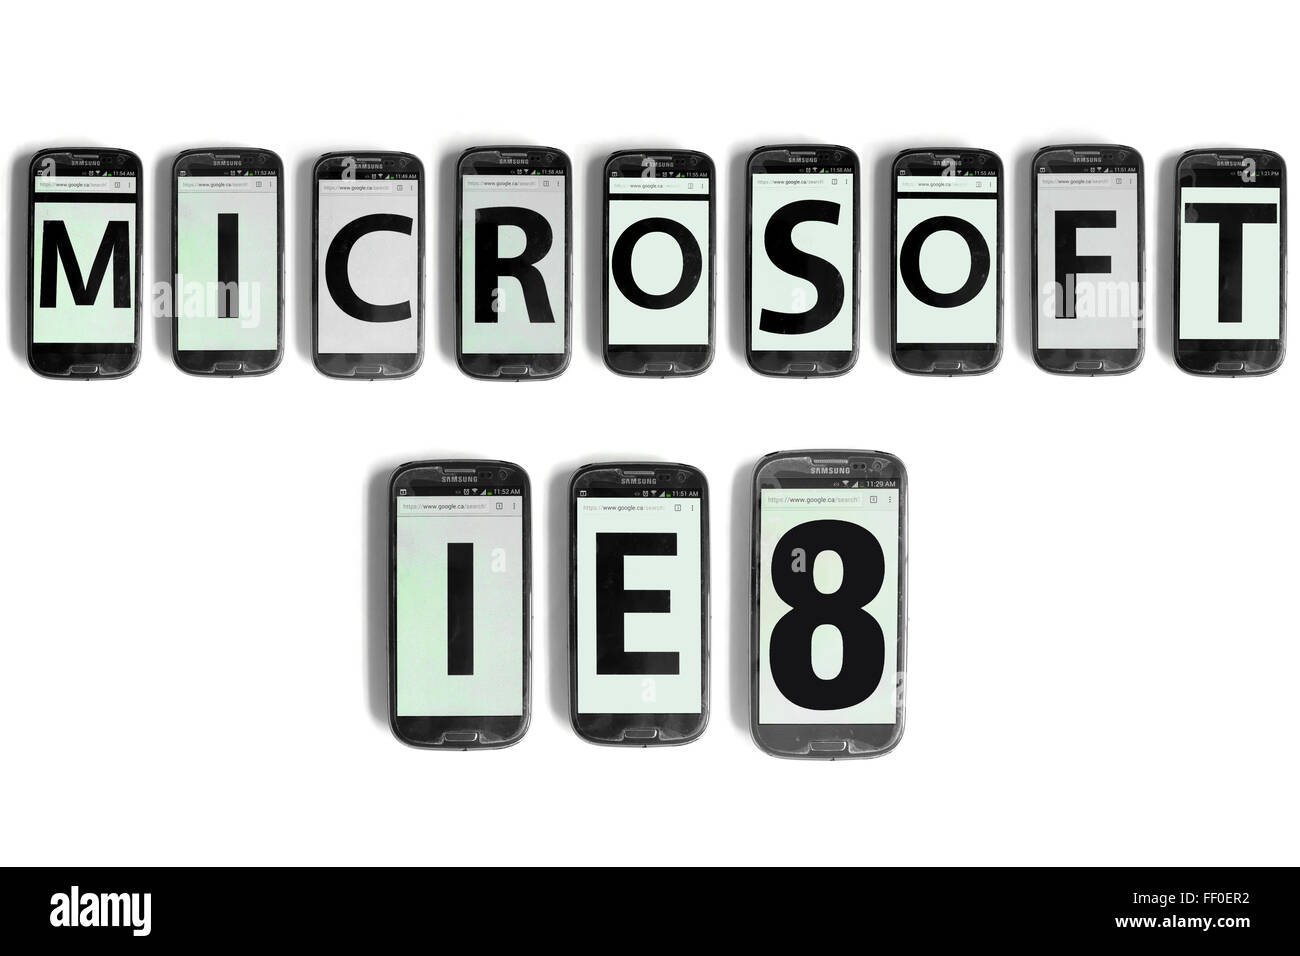 Microsoft ie8 msie8 Cut Out Stock Images & Pictures - Alamy